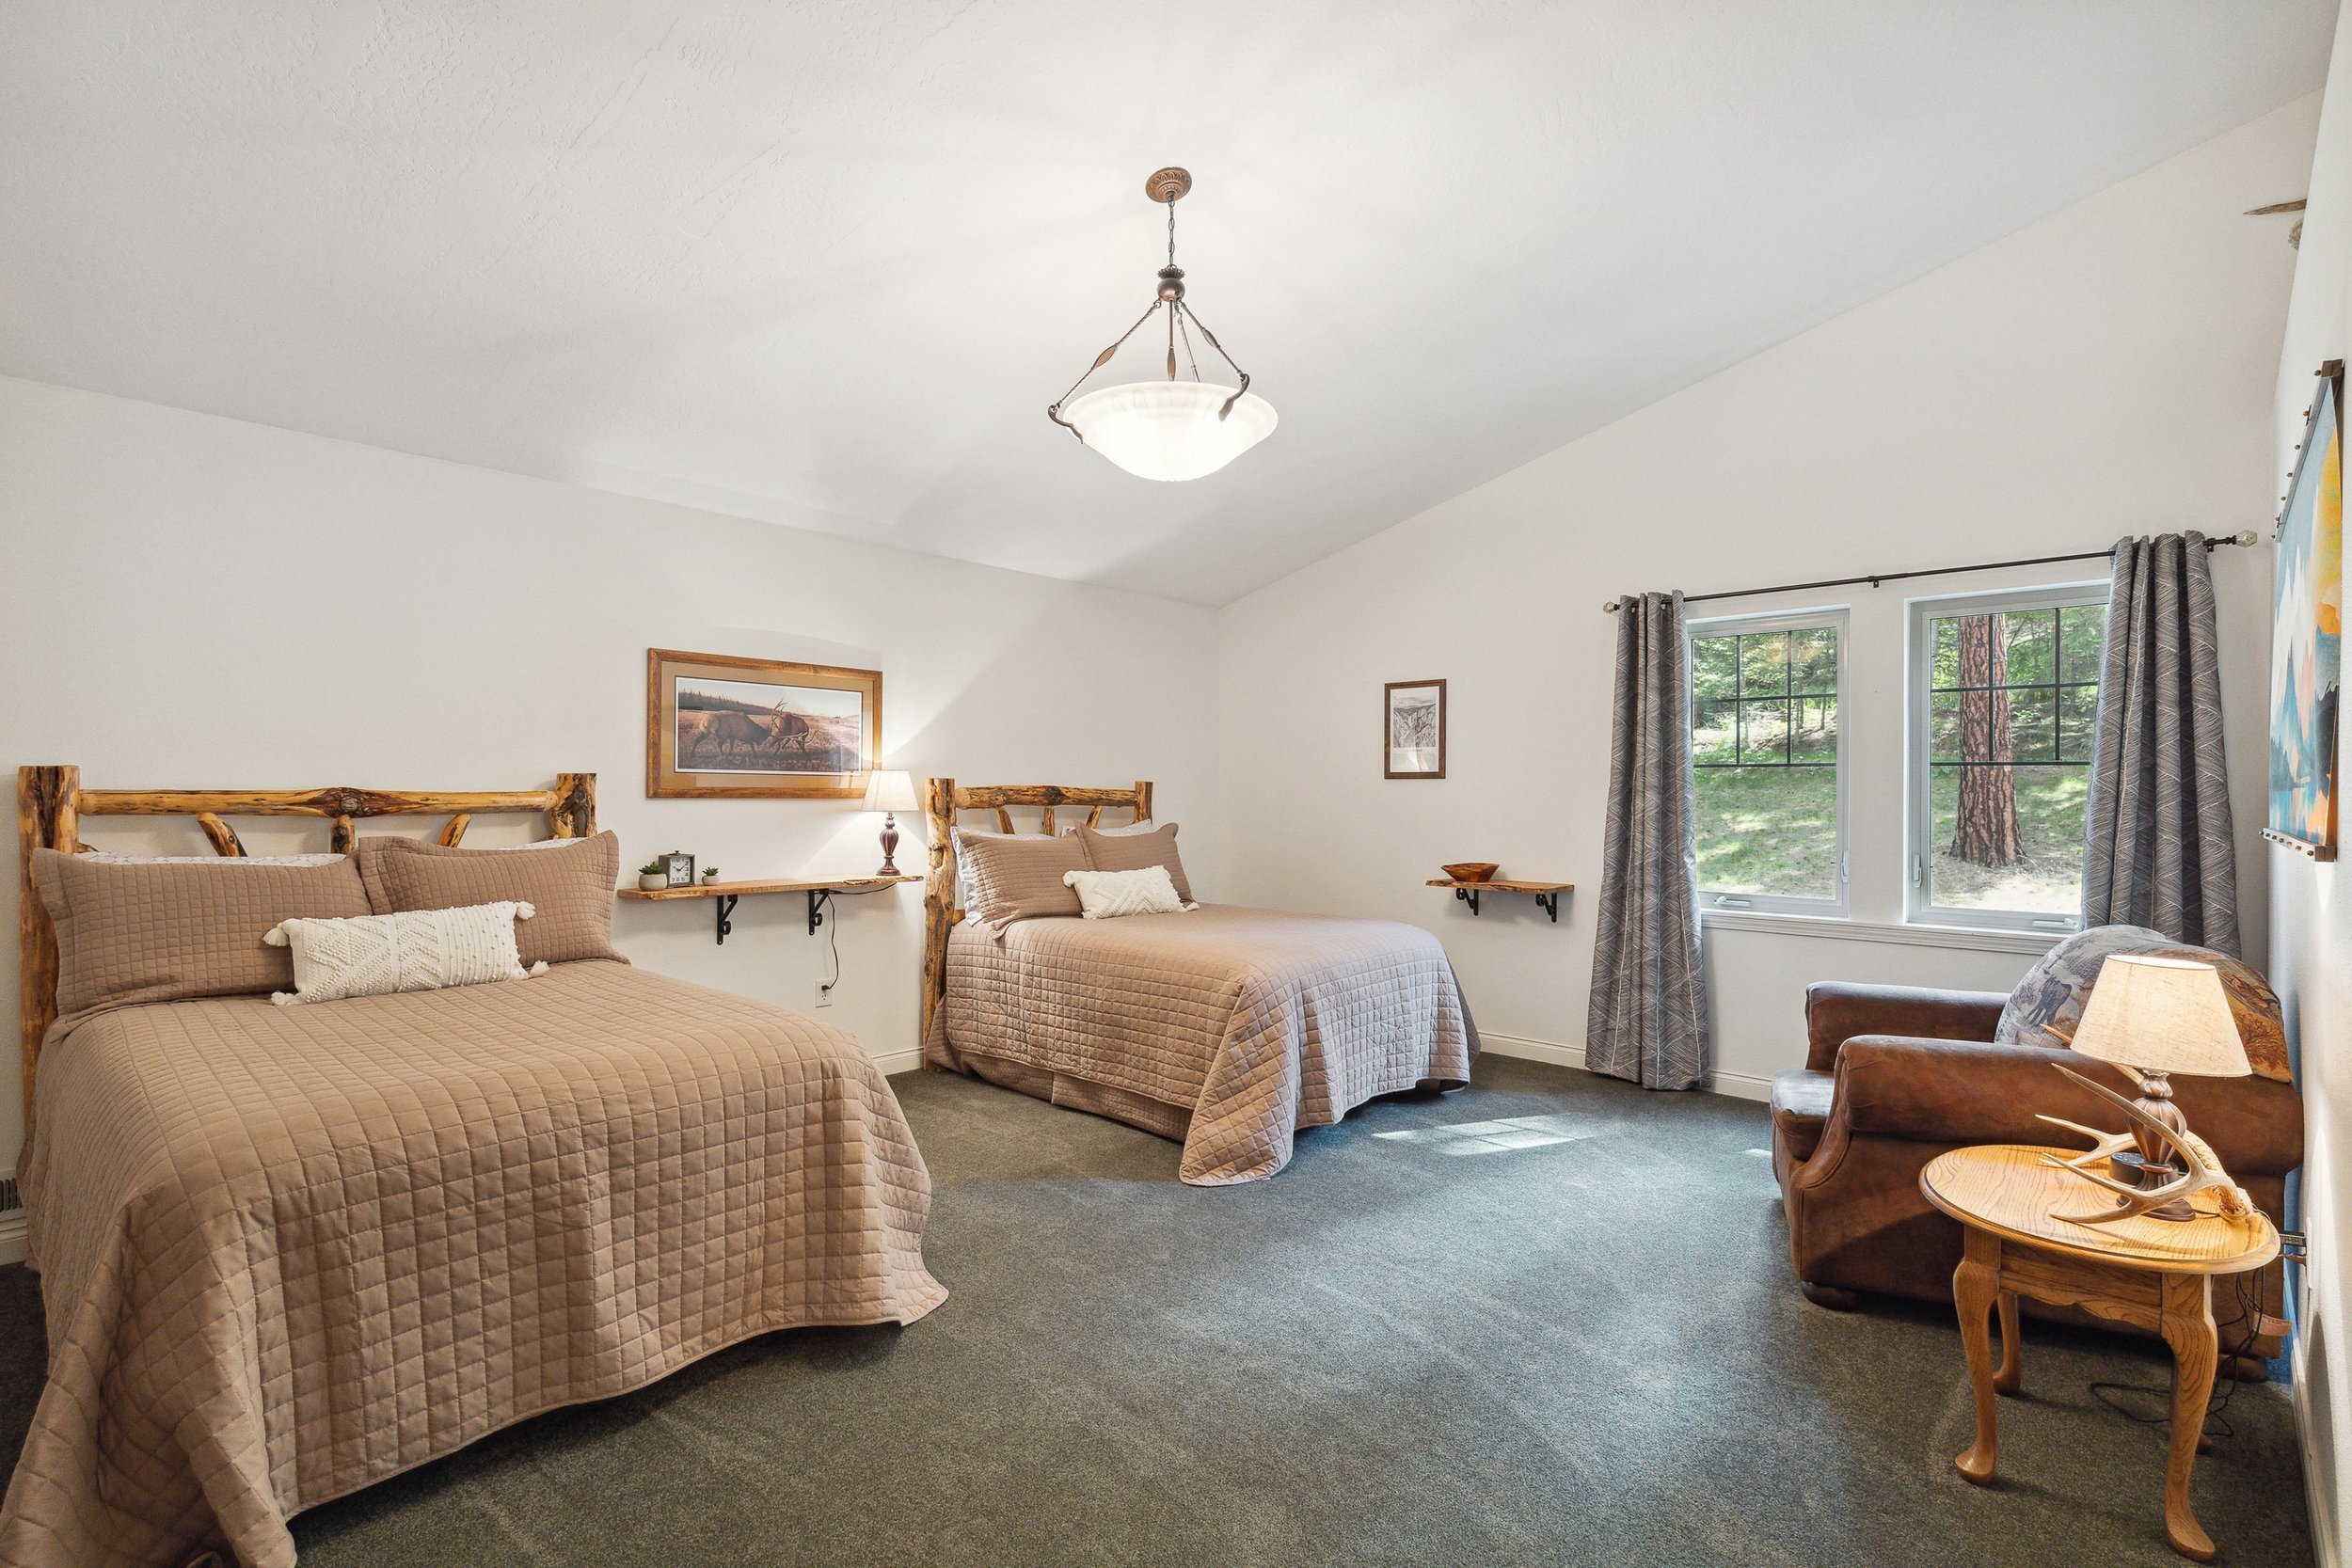 The Lodge at Forest Grove | Missoula Montana Fly Fishing Lodge | Room in the lodge with two queen beds.jpeg